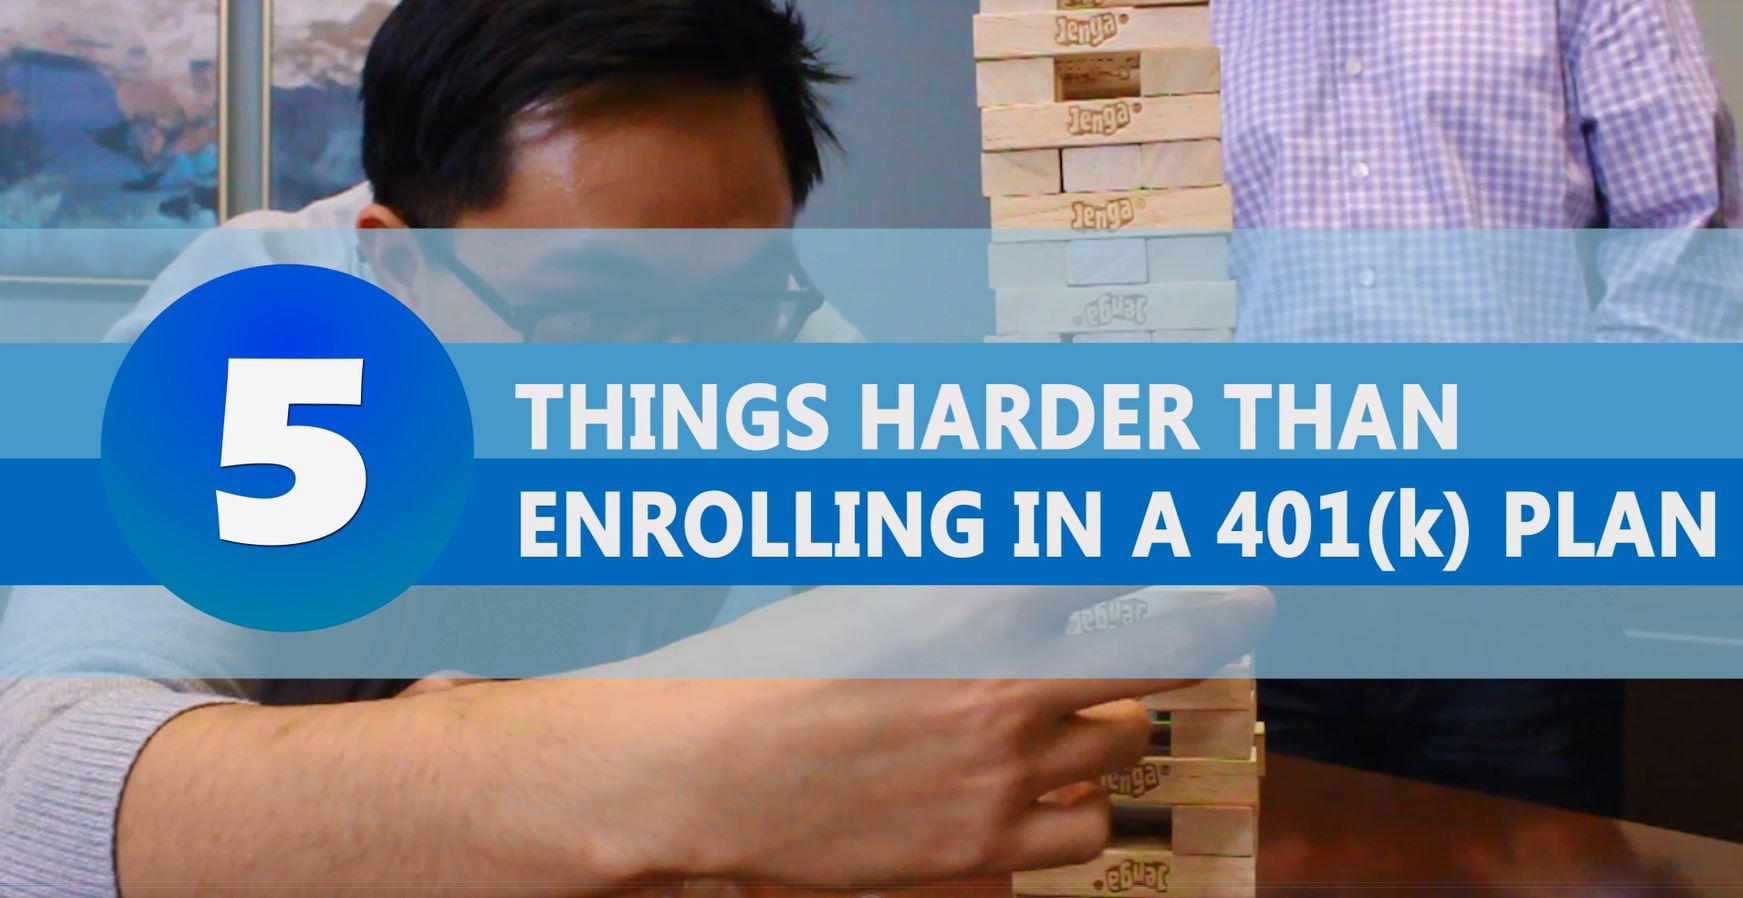 VIDEO: 5 Things Harder Than Enrolling in a 401(k) Plan